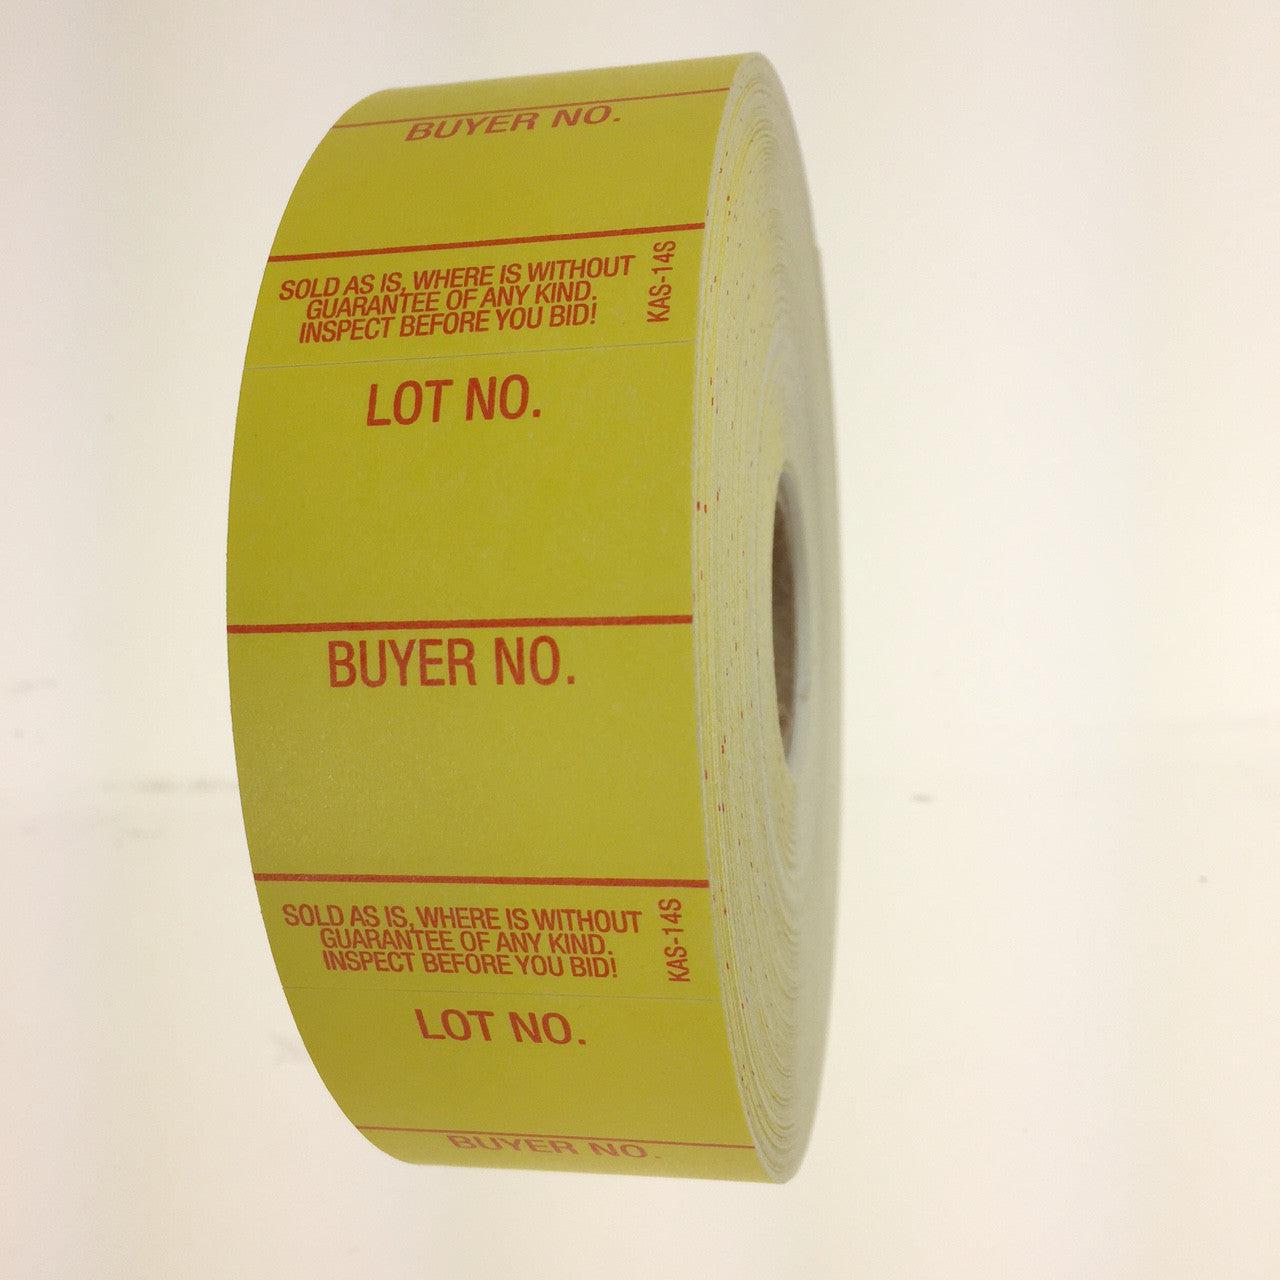 Consecutive Number 1 - 1000 1/2 Round Stickers - InStock Labels